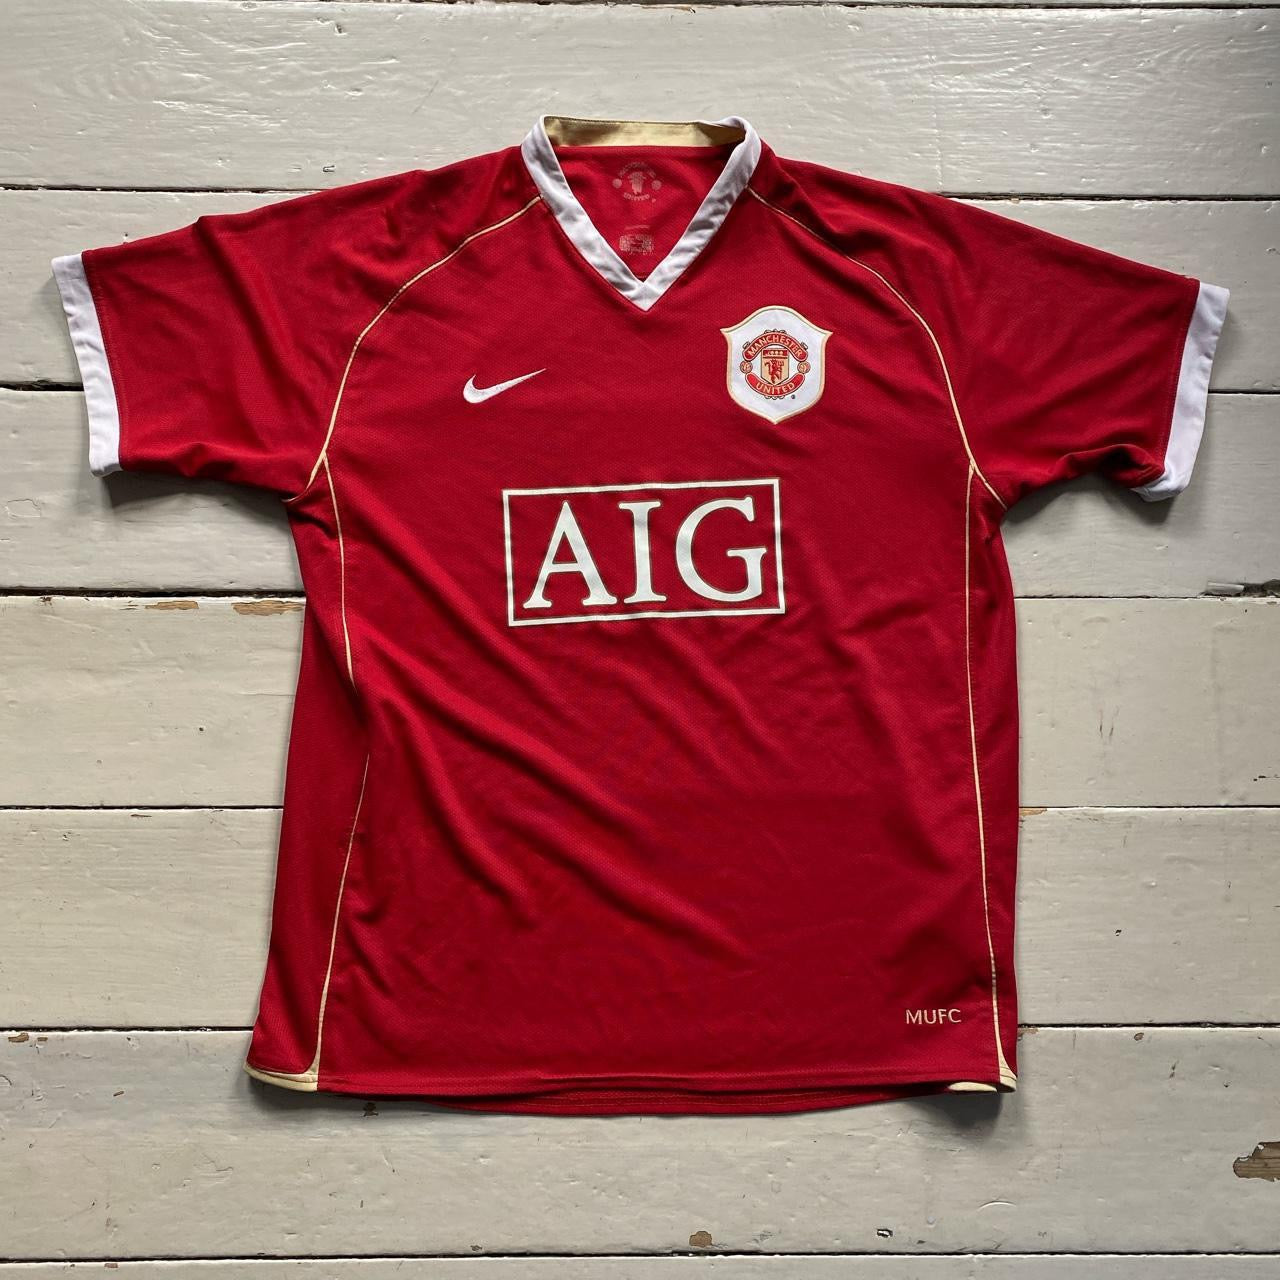 Nike AIG Manchester United Football Jersey (Large)